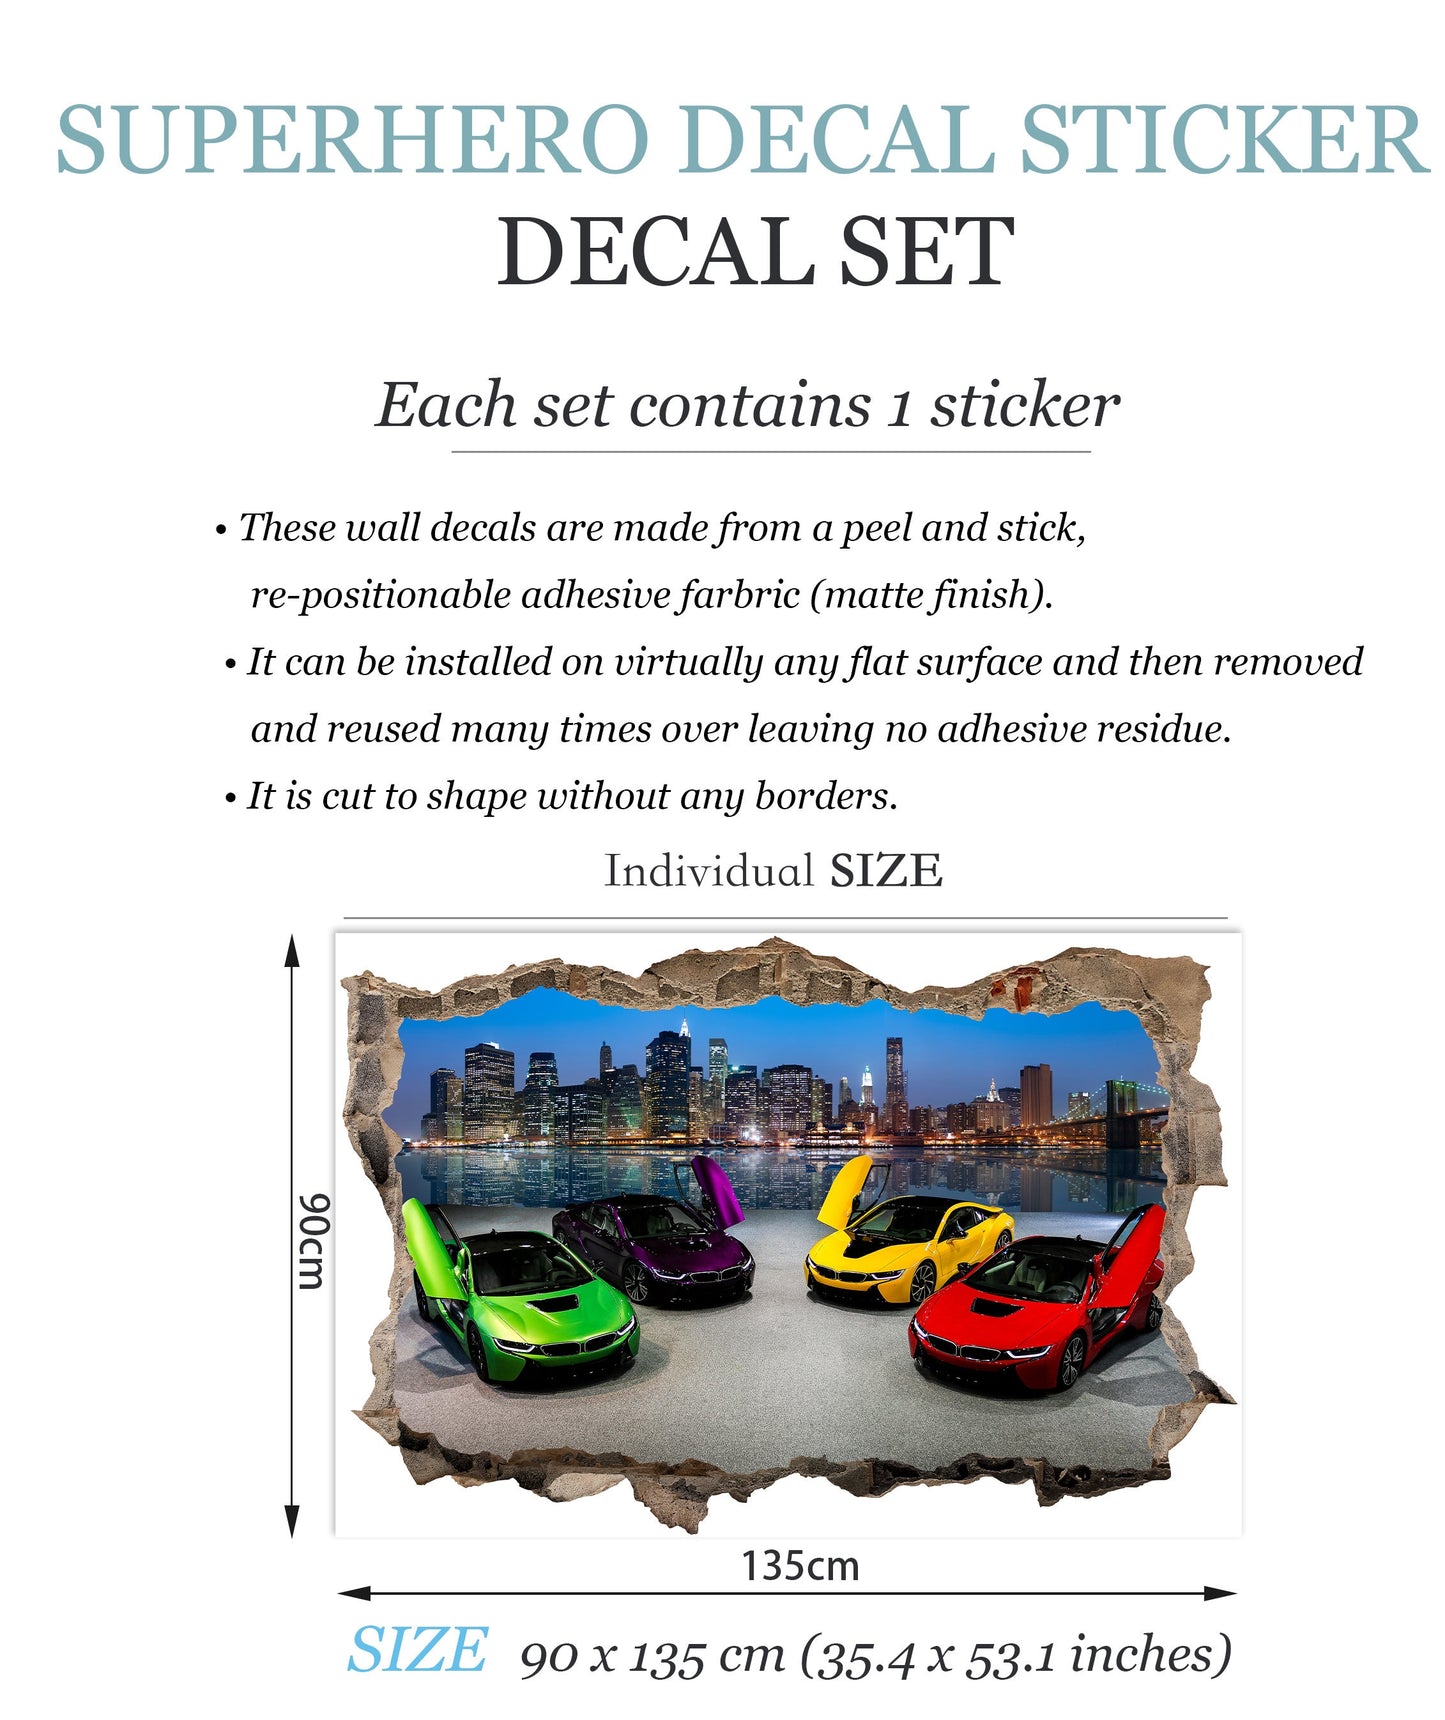 Urban Night Escape - Supercars Burst 3D Broken Wall Decal - Removable Peel and Stick - BW002